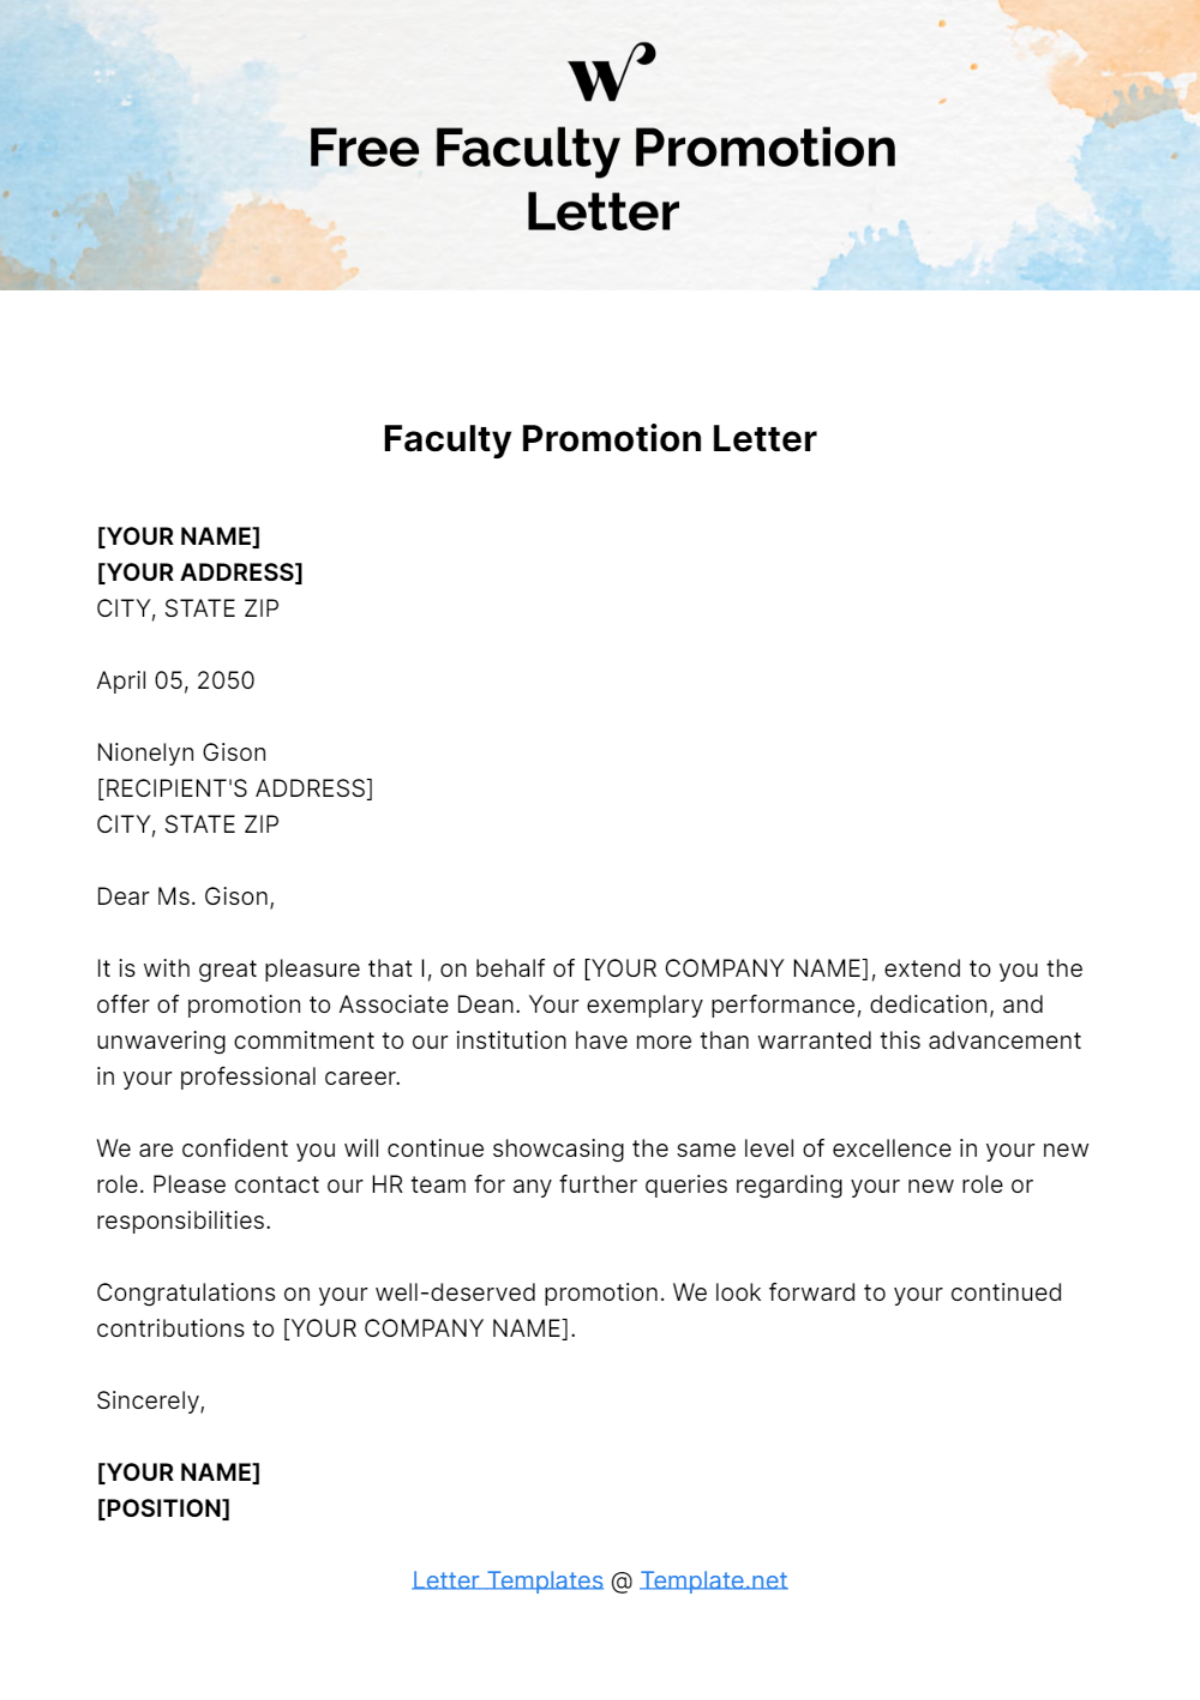 Faculty Promotion Letter Template